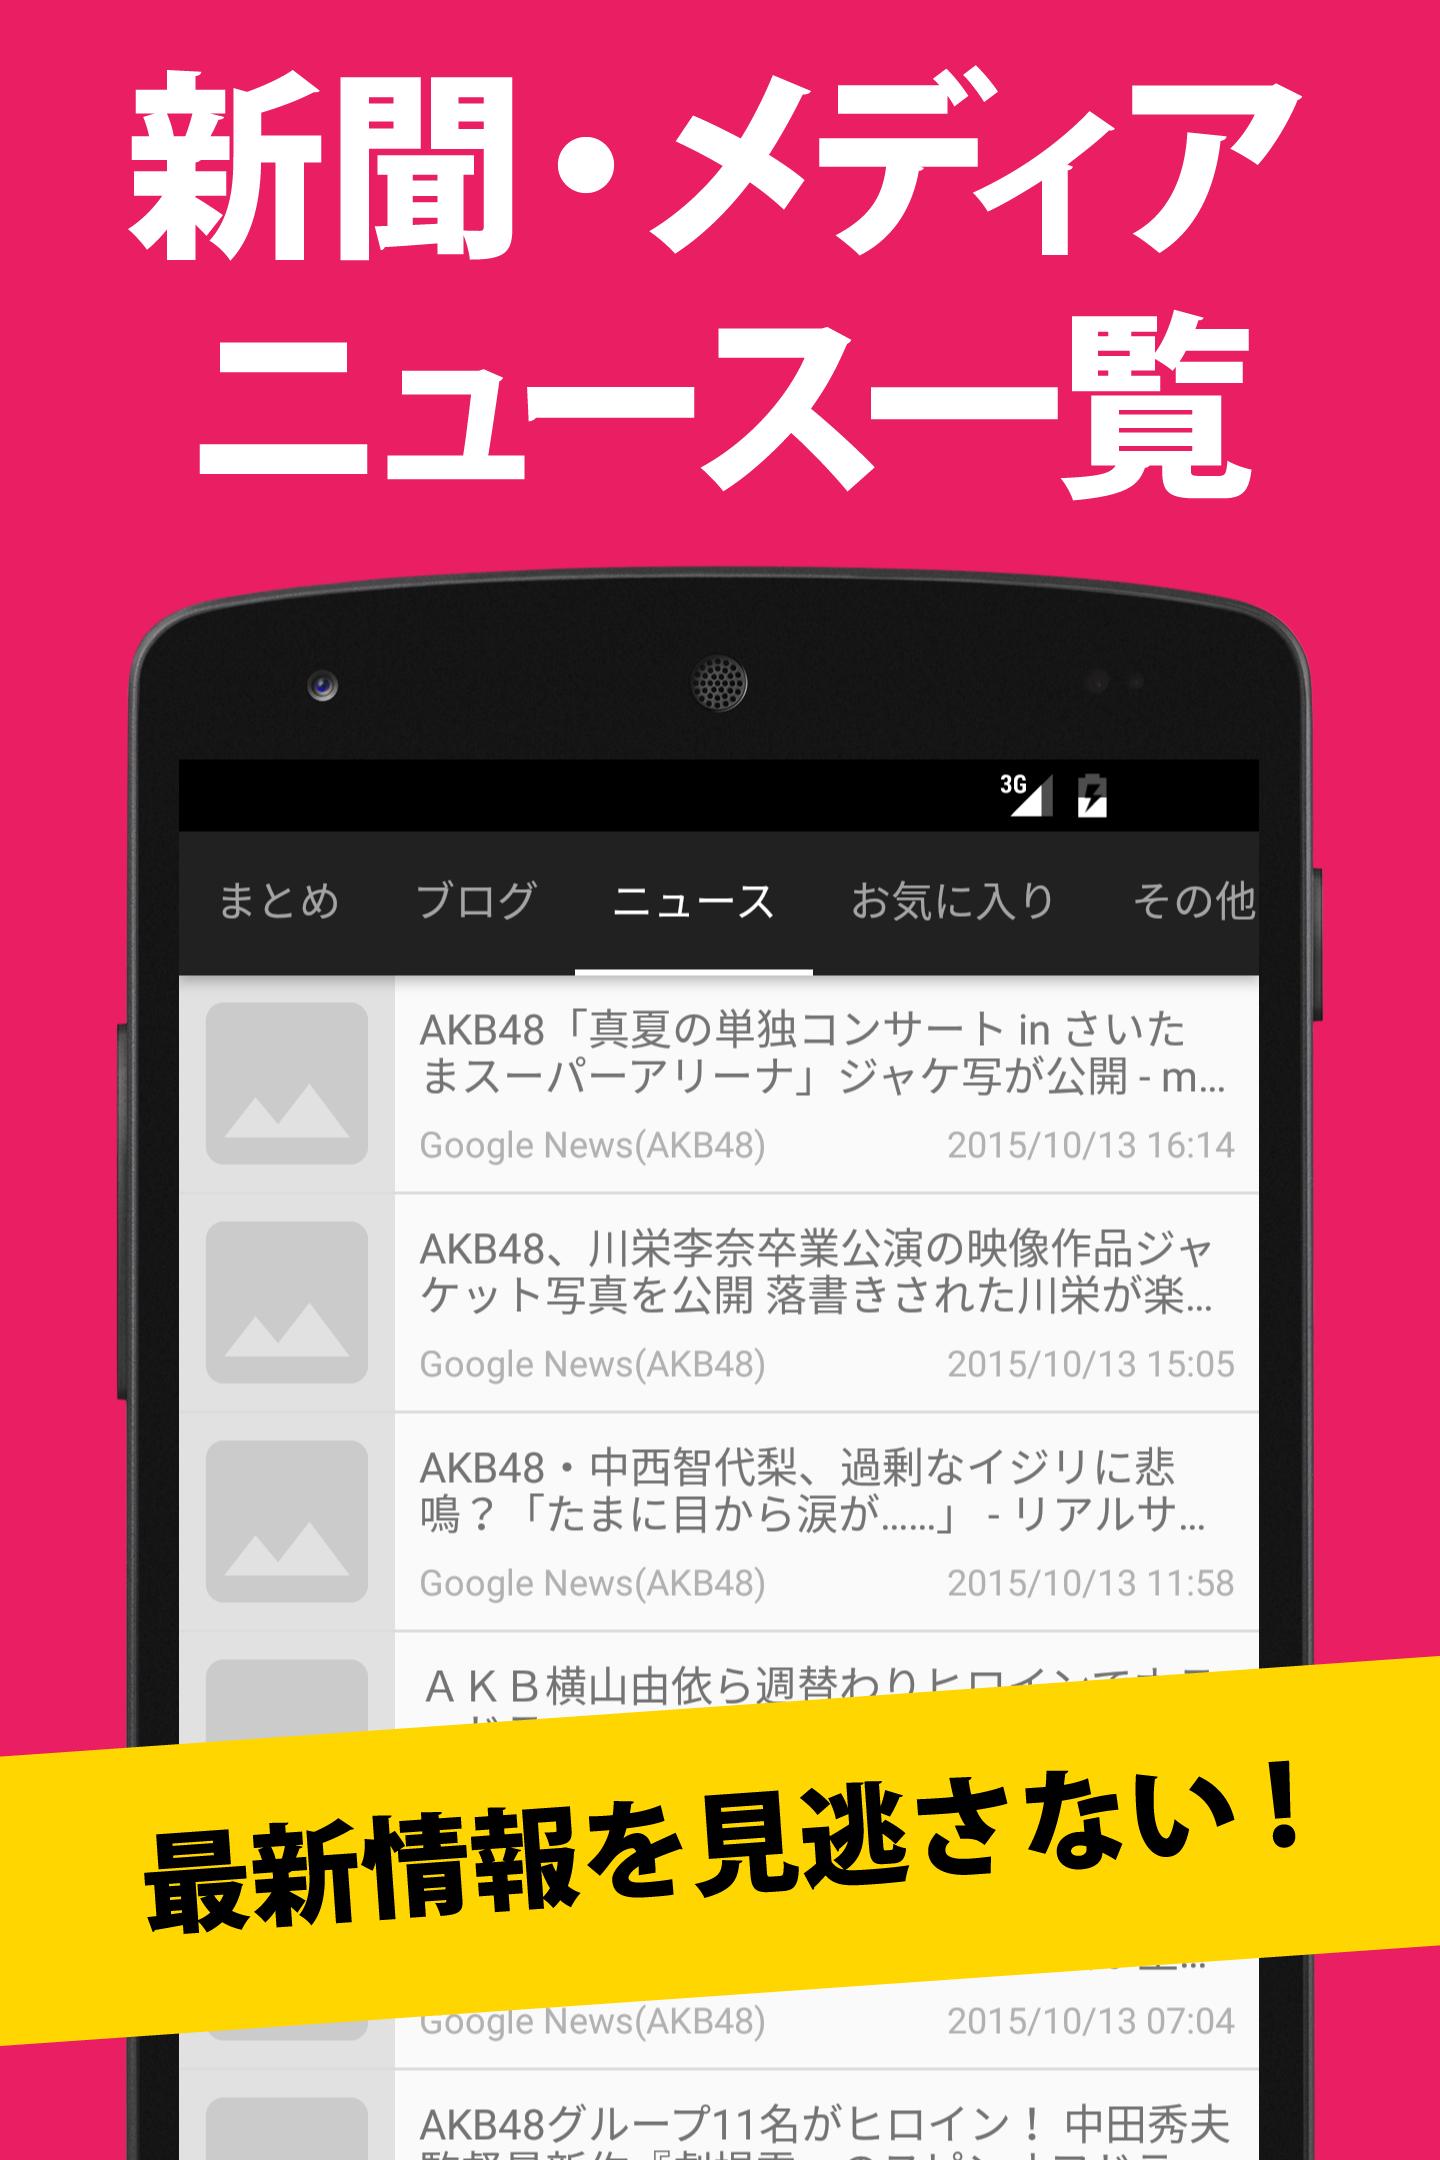 Akbまとめ For Akb48 For Android Apk Download